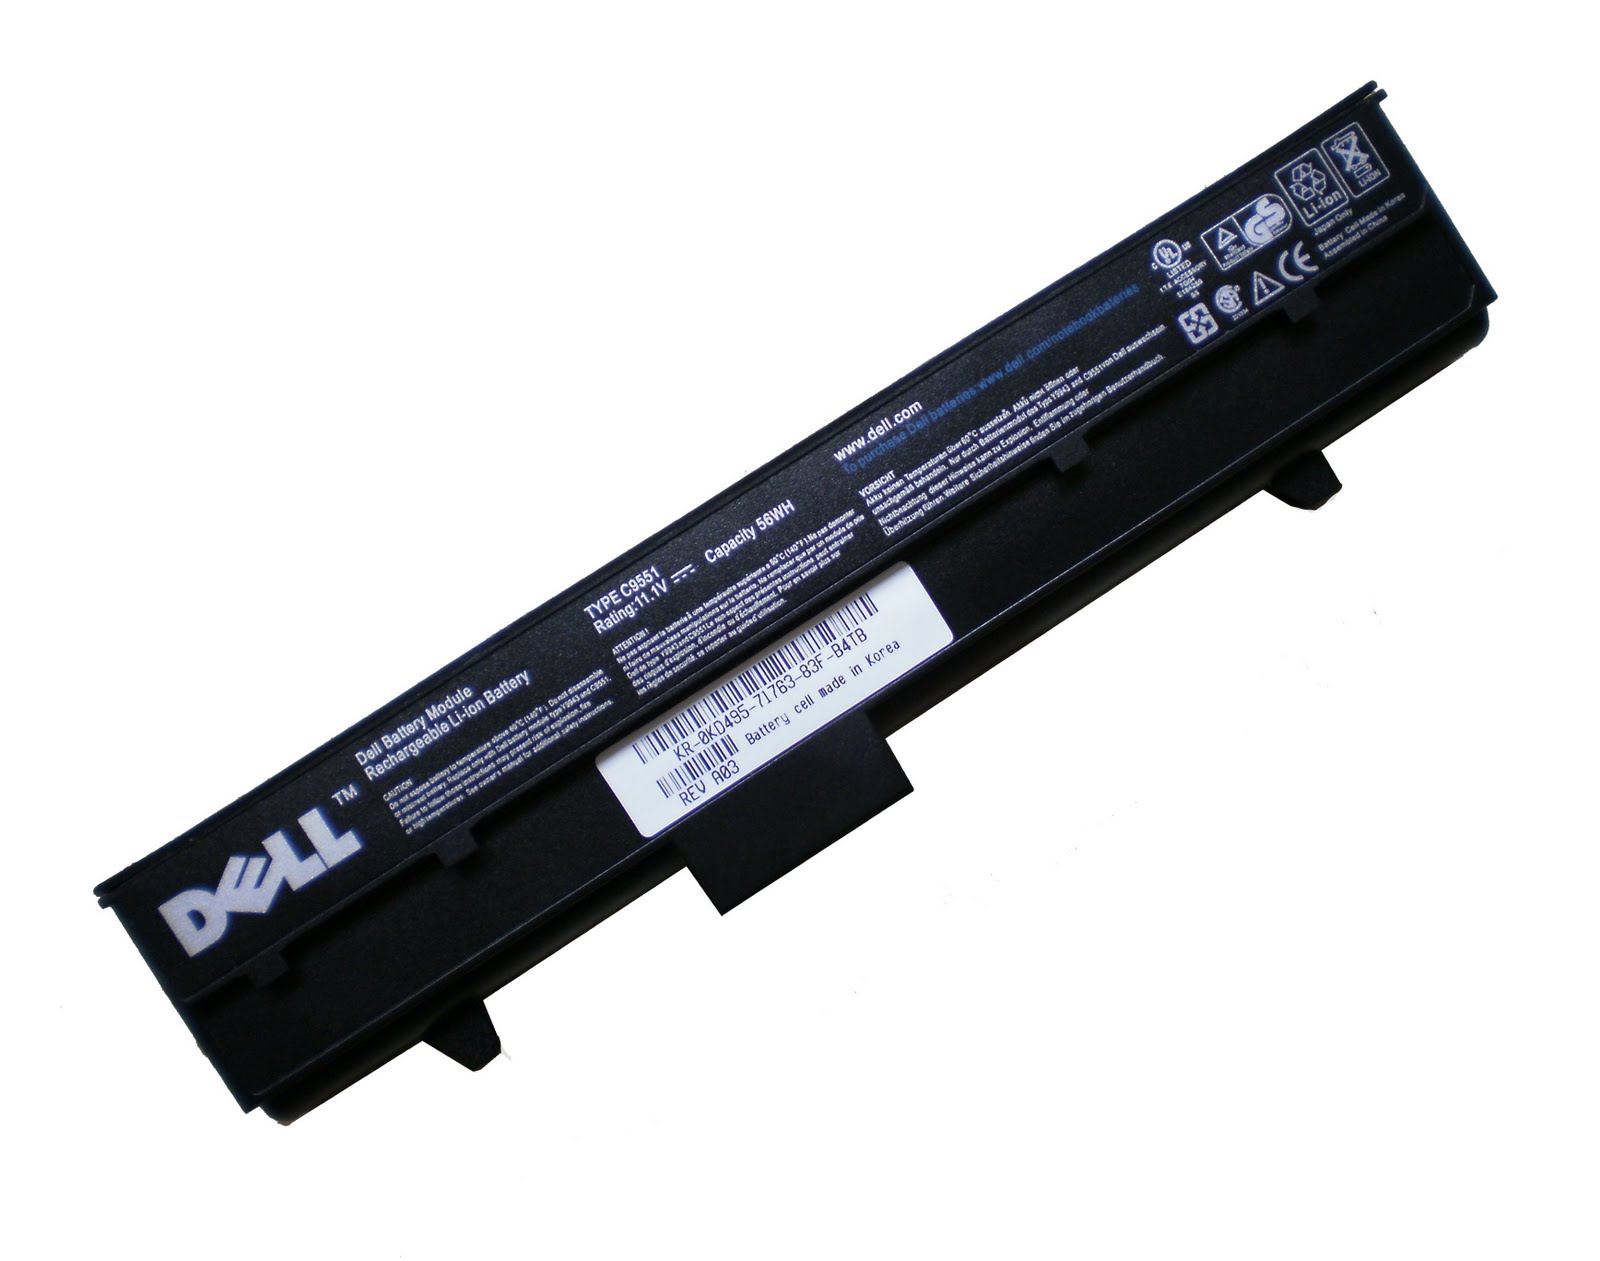 lithium ion li ion batteries lithium ion battery is a